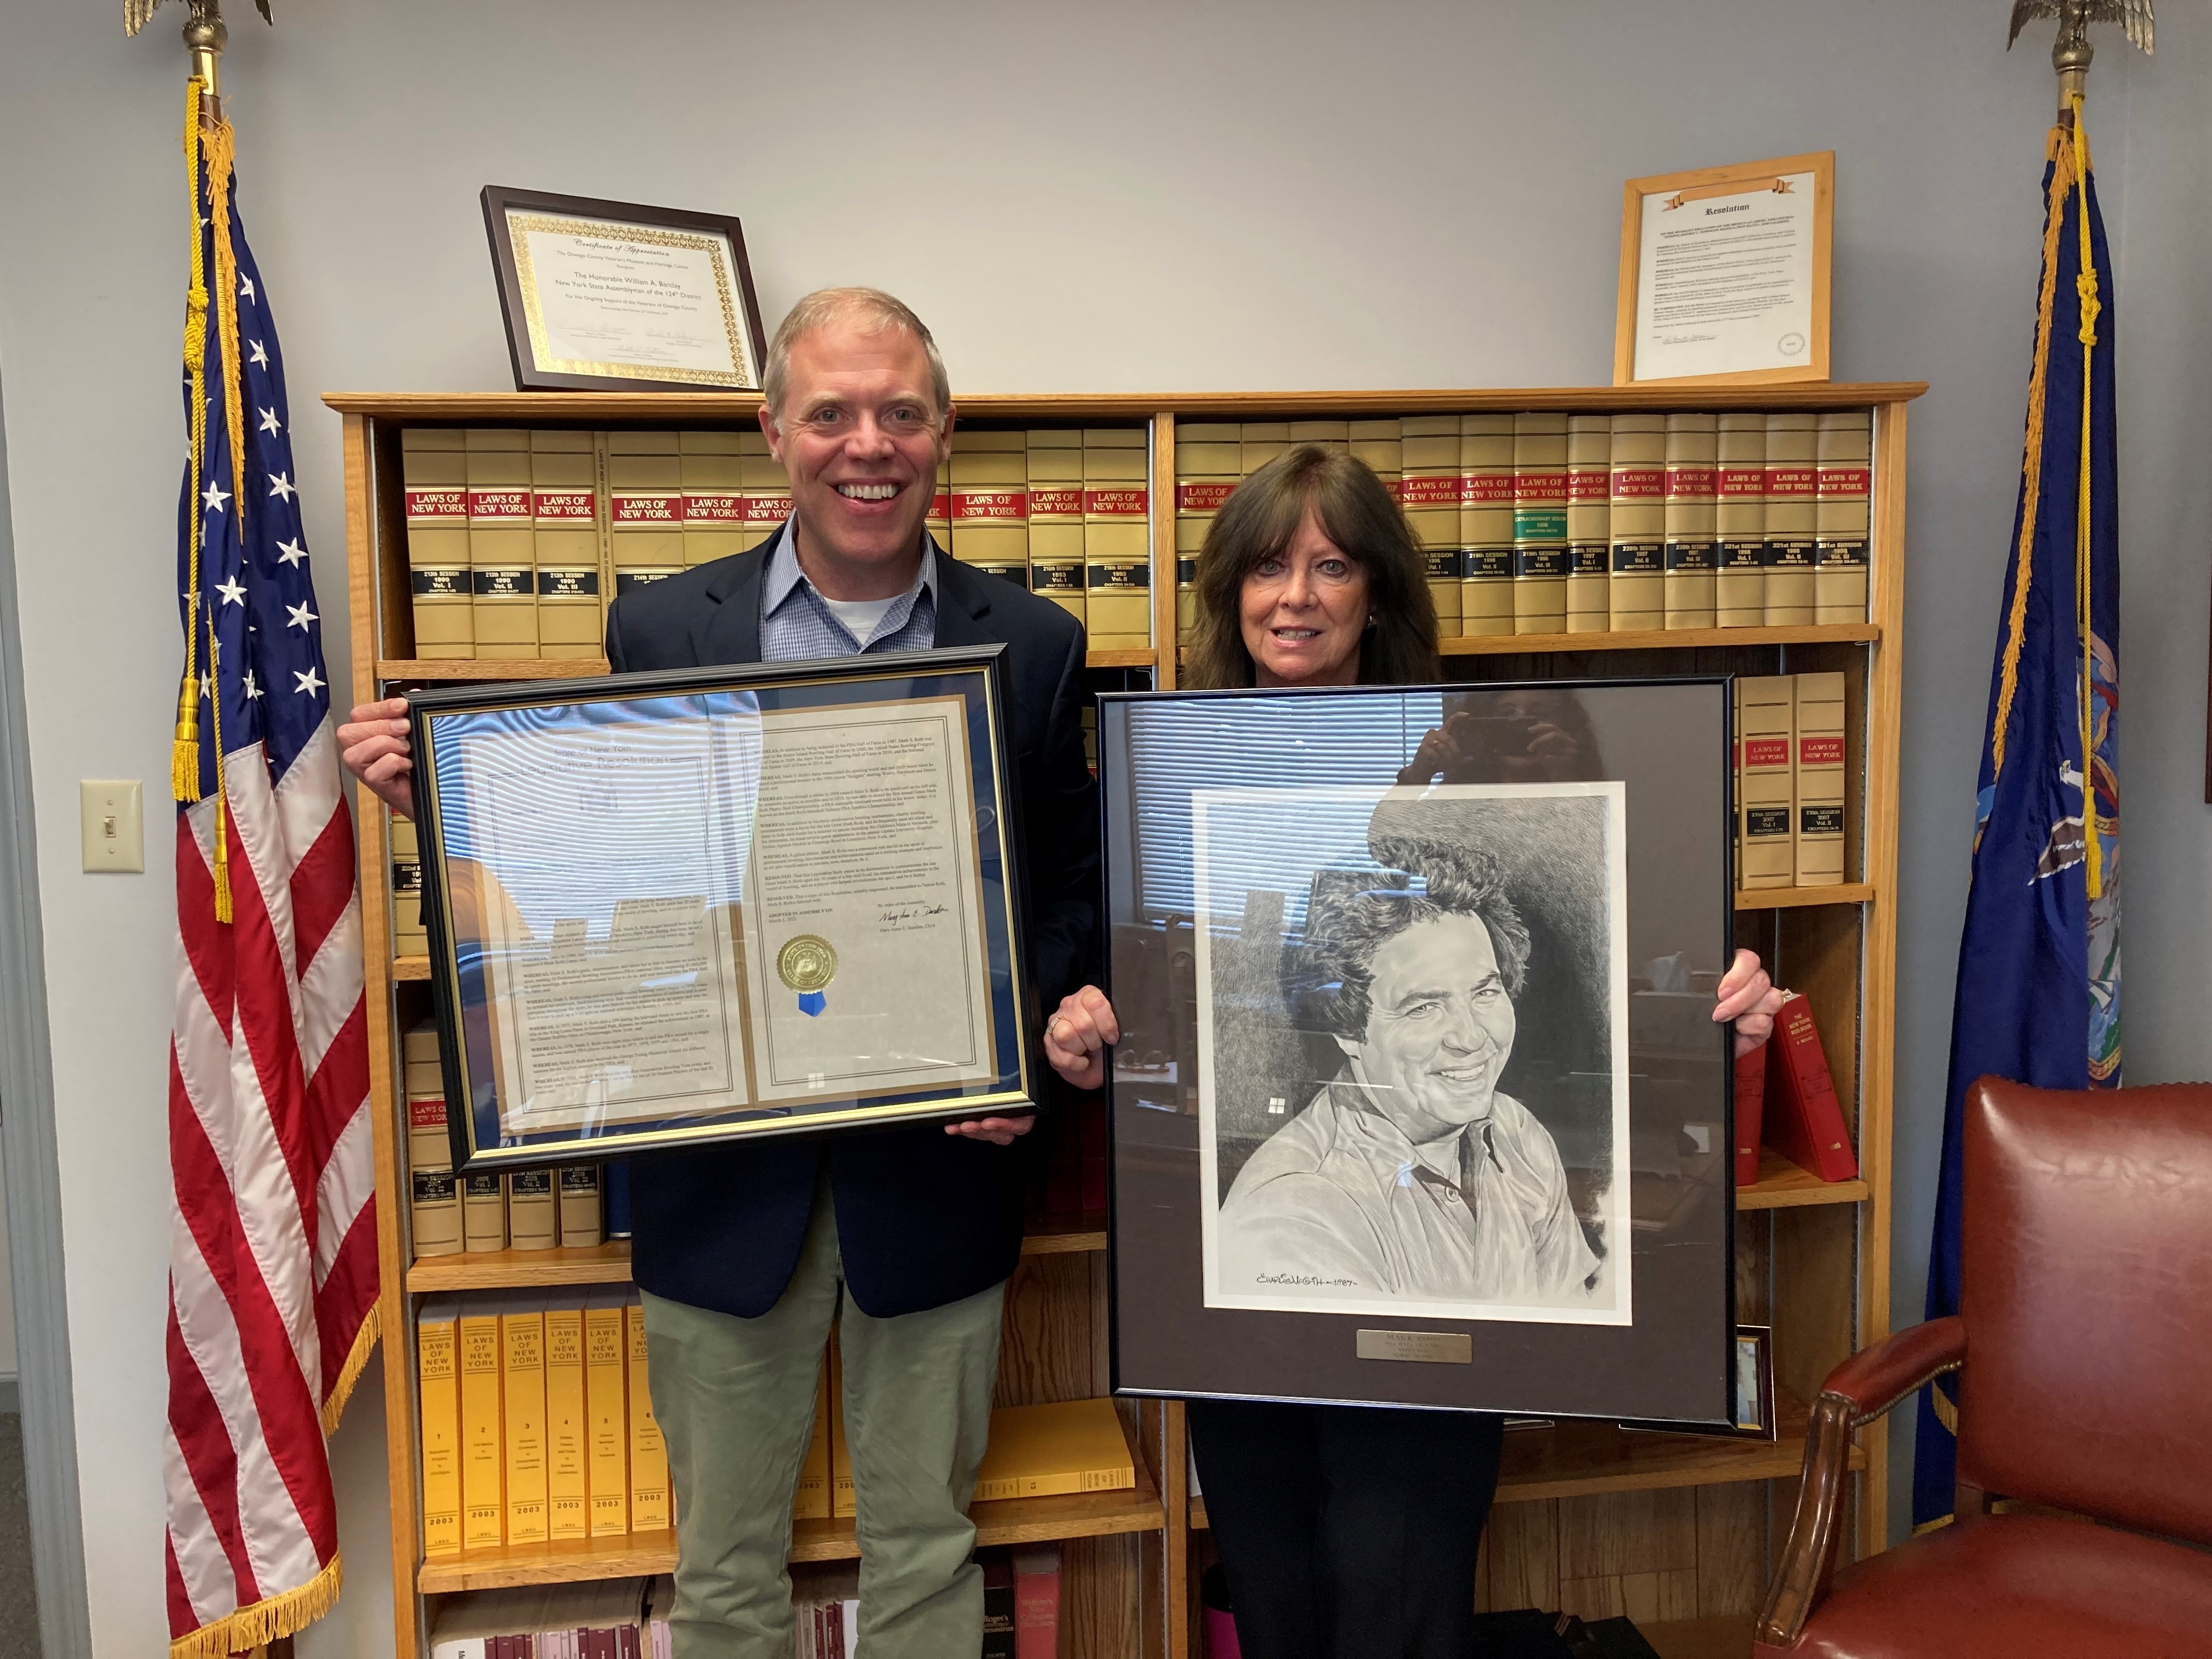 Recently, Assembly Minority Leader Will Barclay (R,C,I-Pulaski) presented Denise Roth, wife of the late great Mark Roth, with a state Assembly resolution posthumously honoring the bowling icon who was